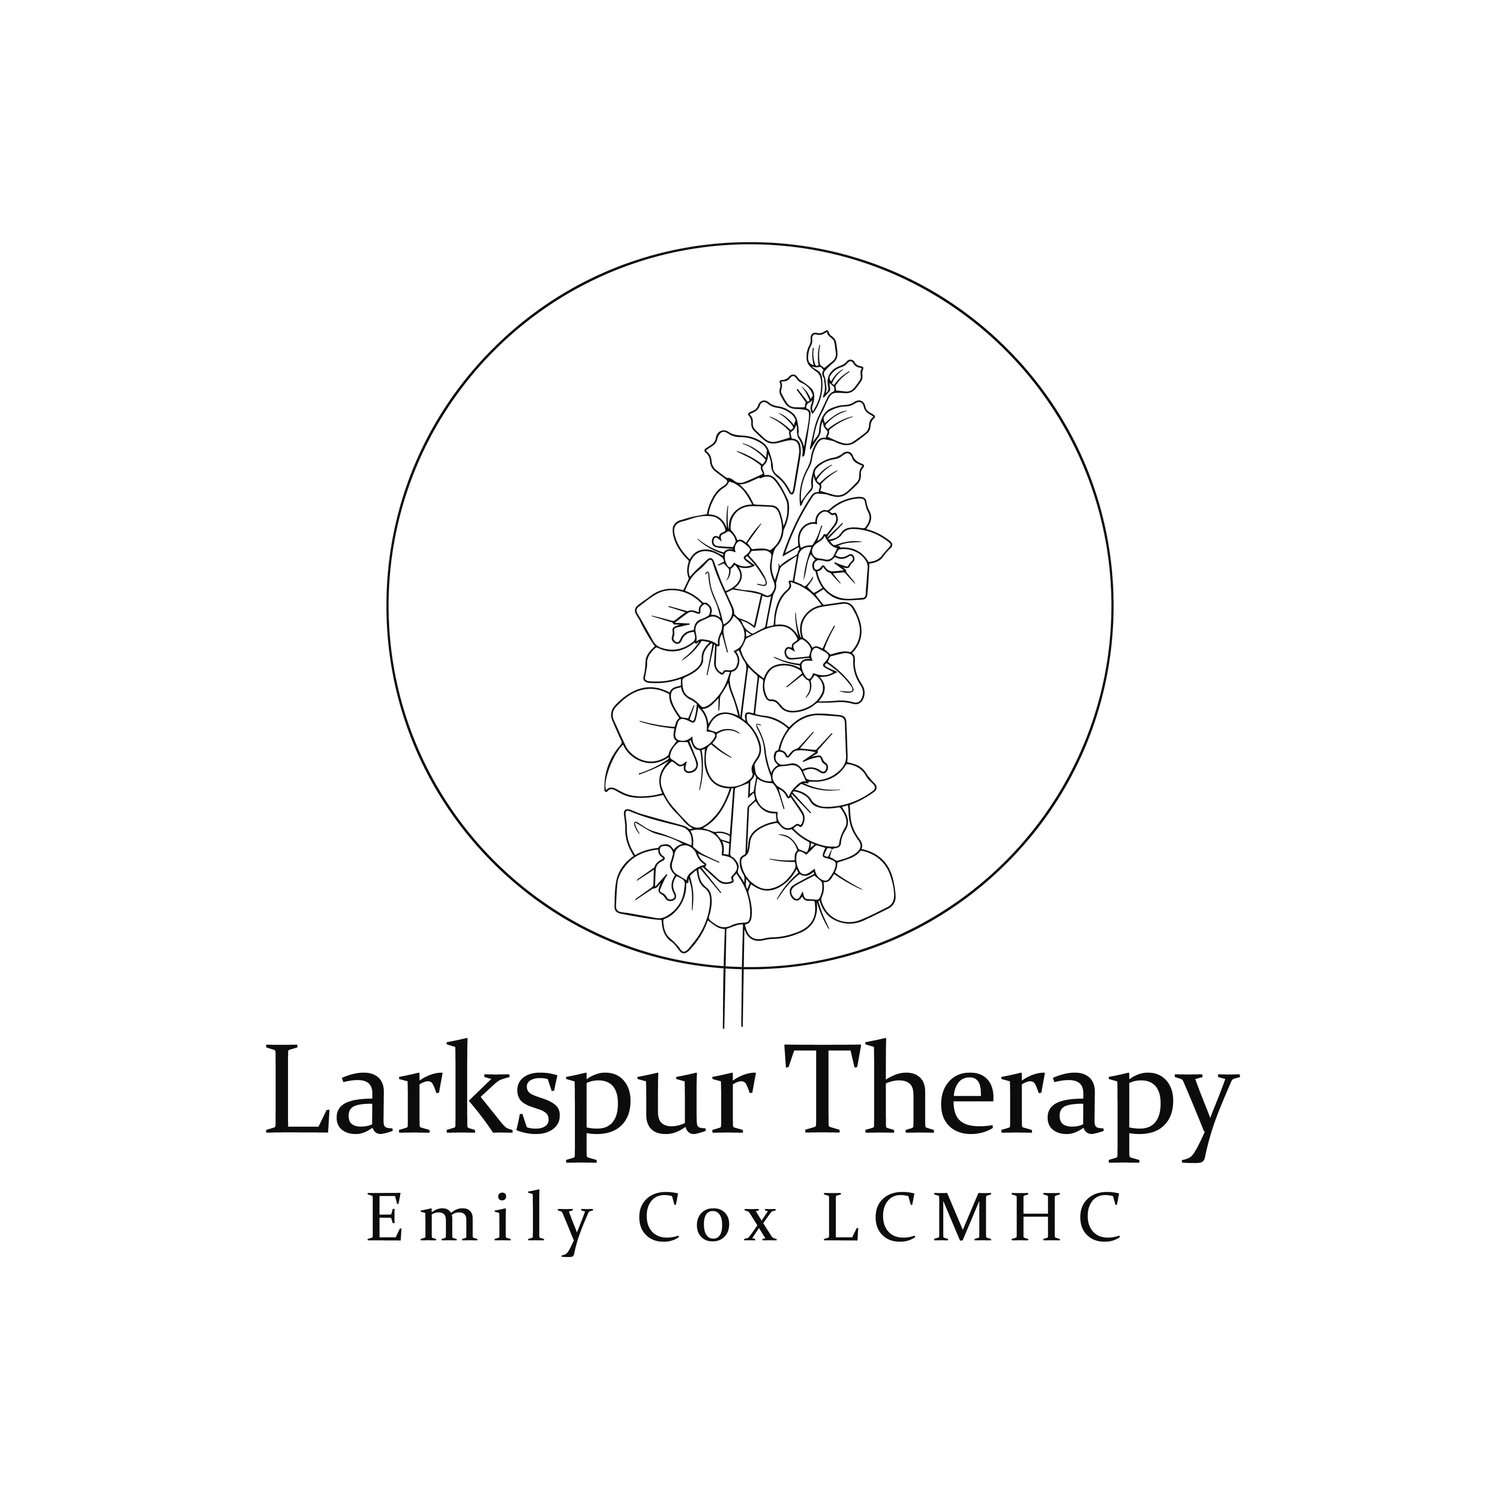 Larkspur Therapy